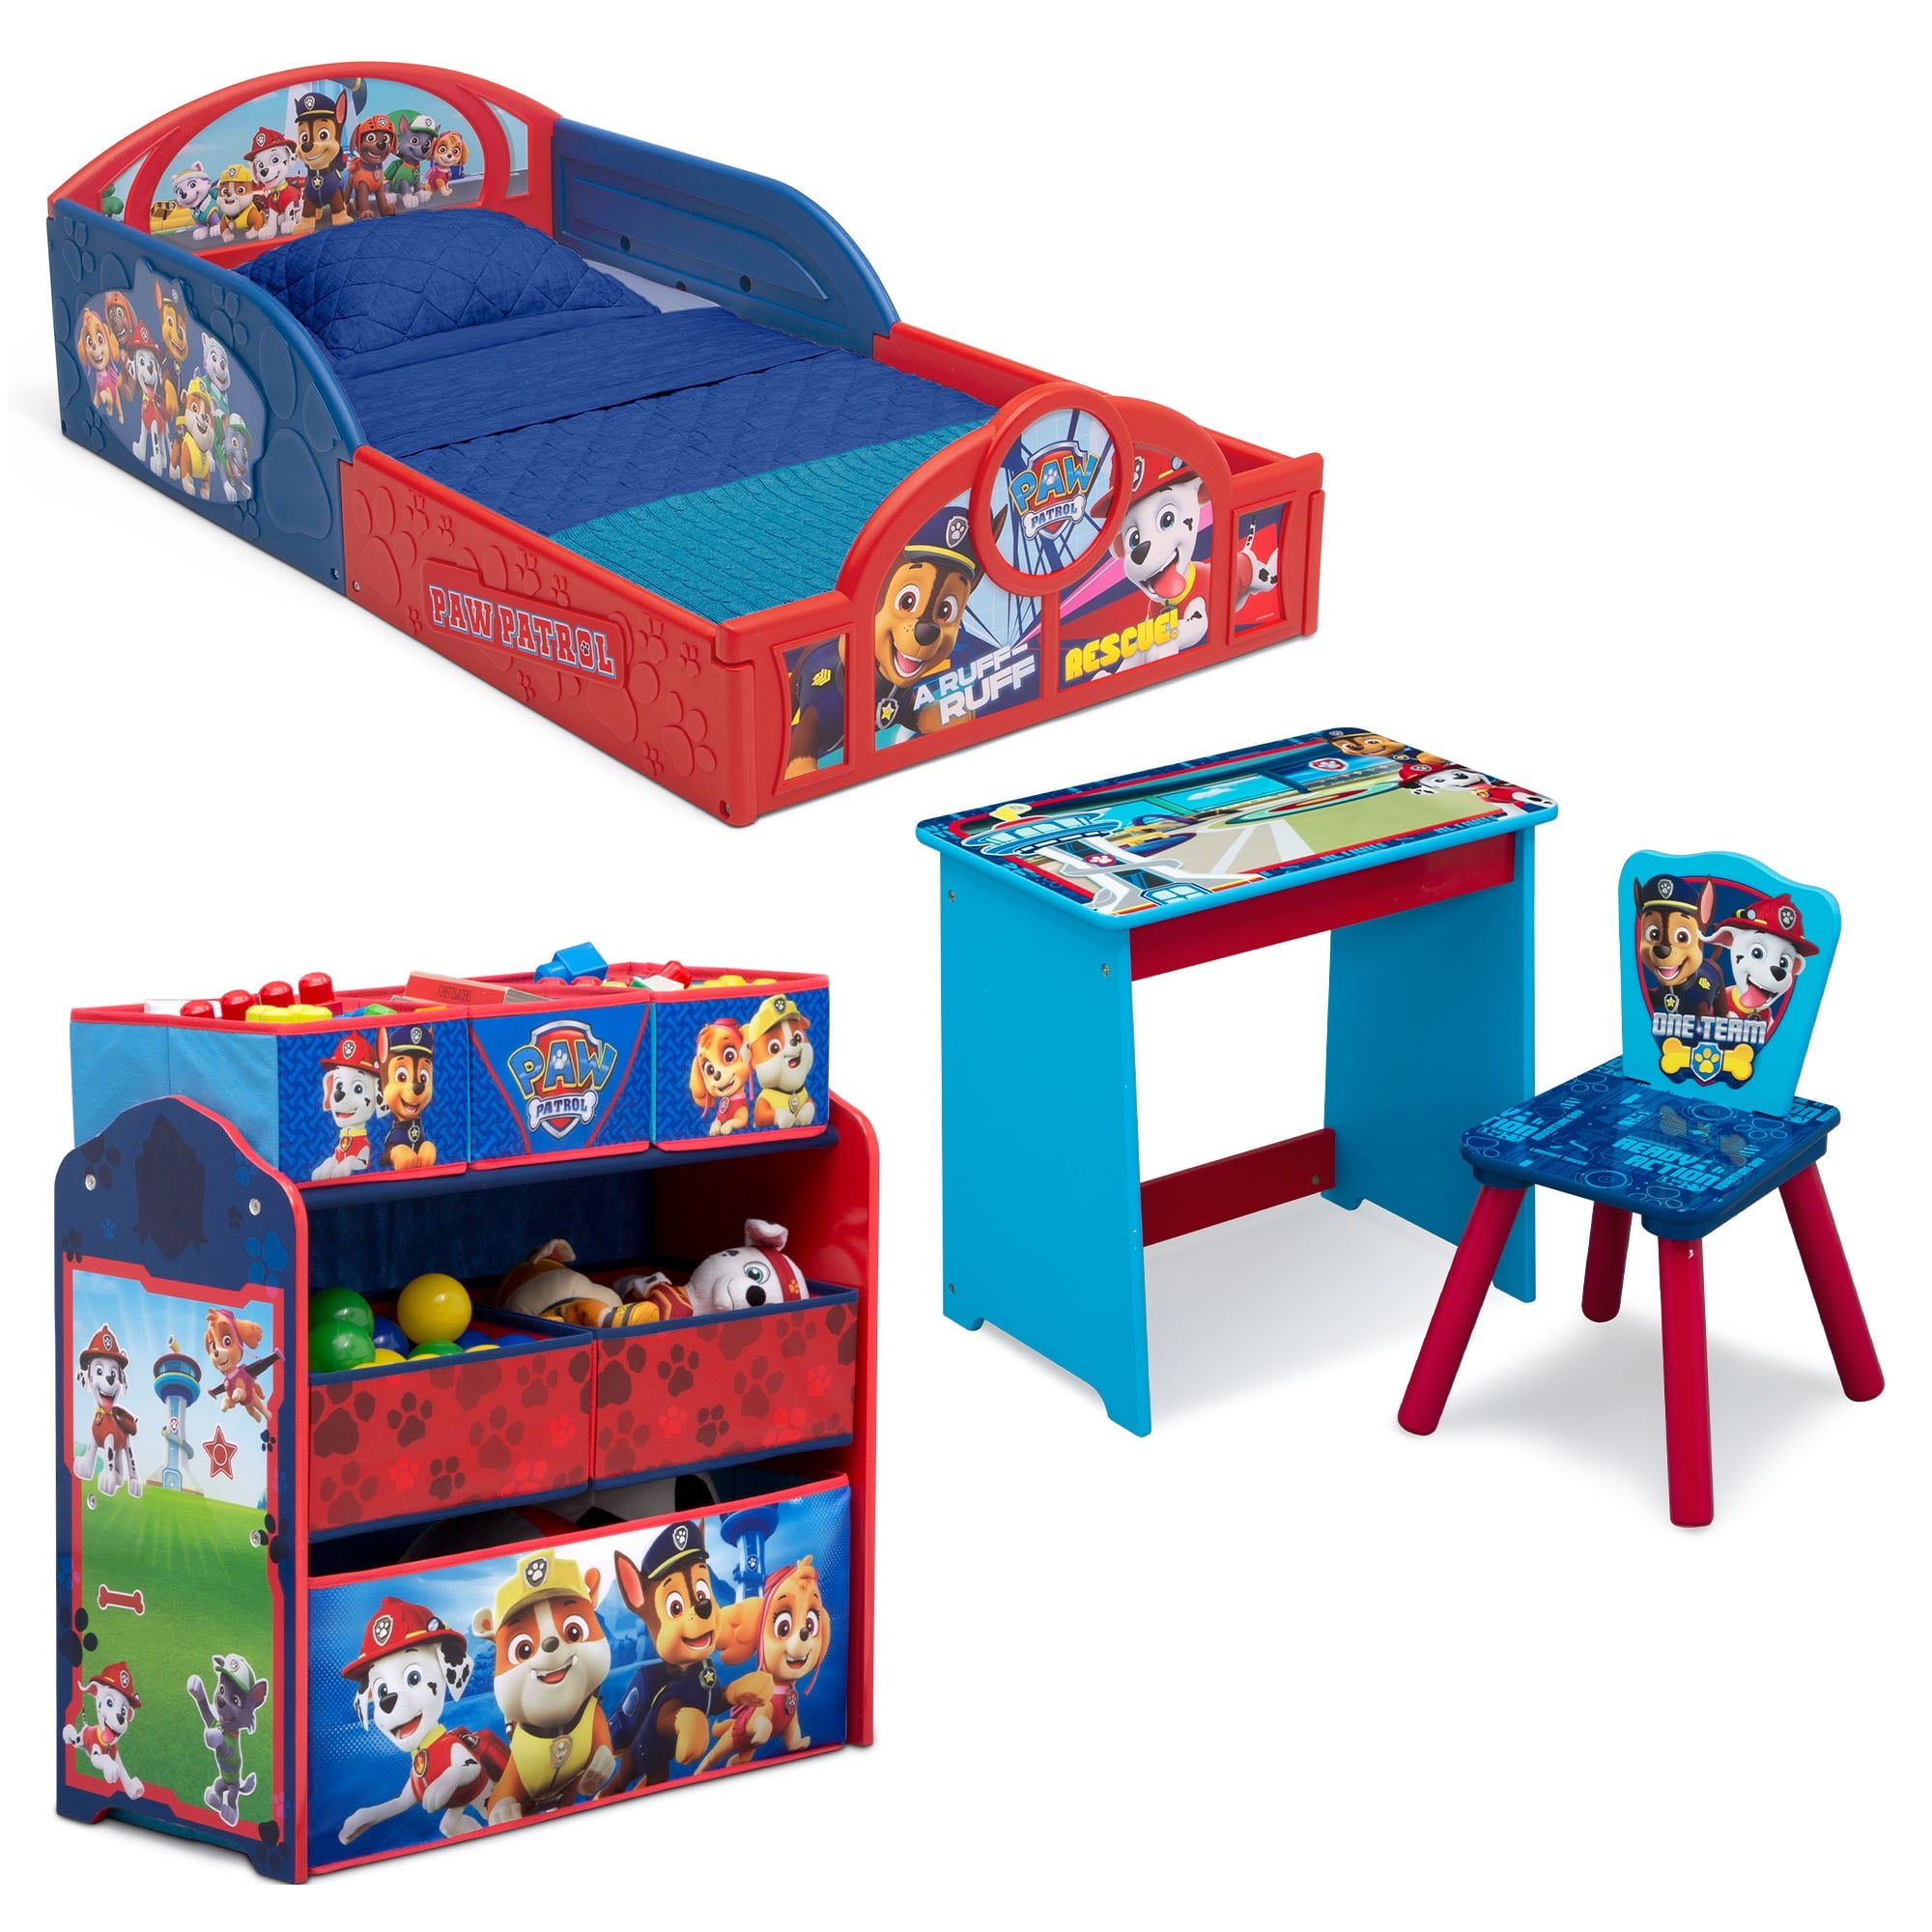 Nick Jr. PAW Patrol 4-Piece Room-in-a-Box Bedroom Set by Delta Children -  Includes Sleep & Play Toddler Bed, 6 Bin Design & Store Toy Organizer and  Art Desk with Chair - Walmart.com